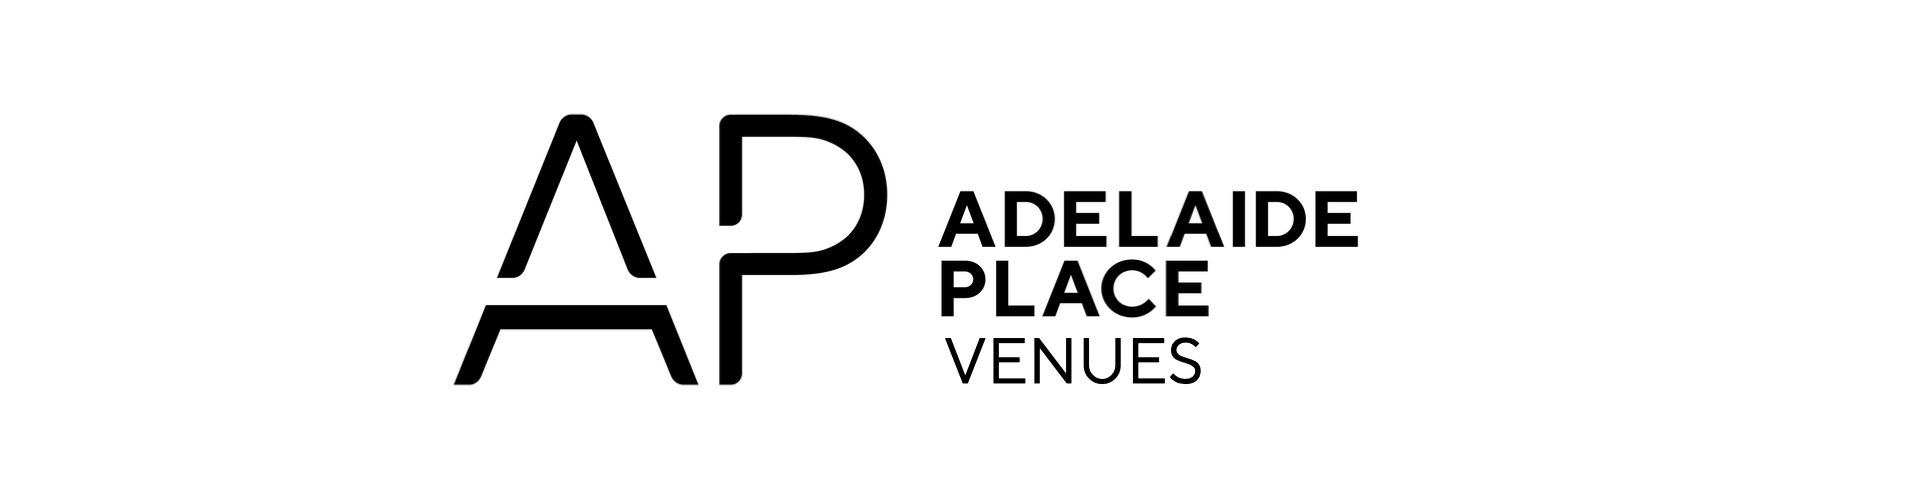 Adelaide Place Venues